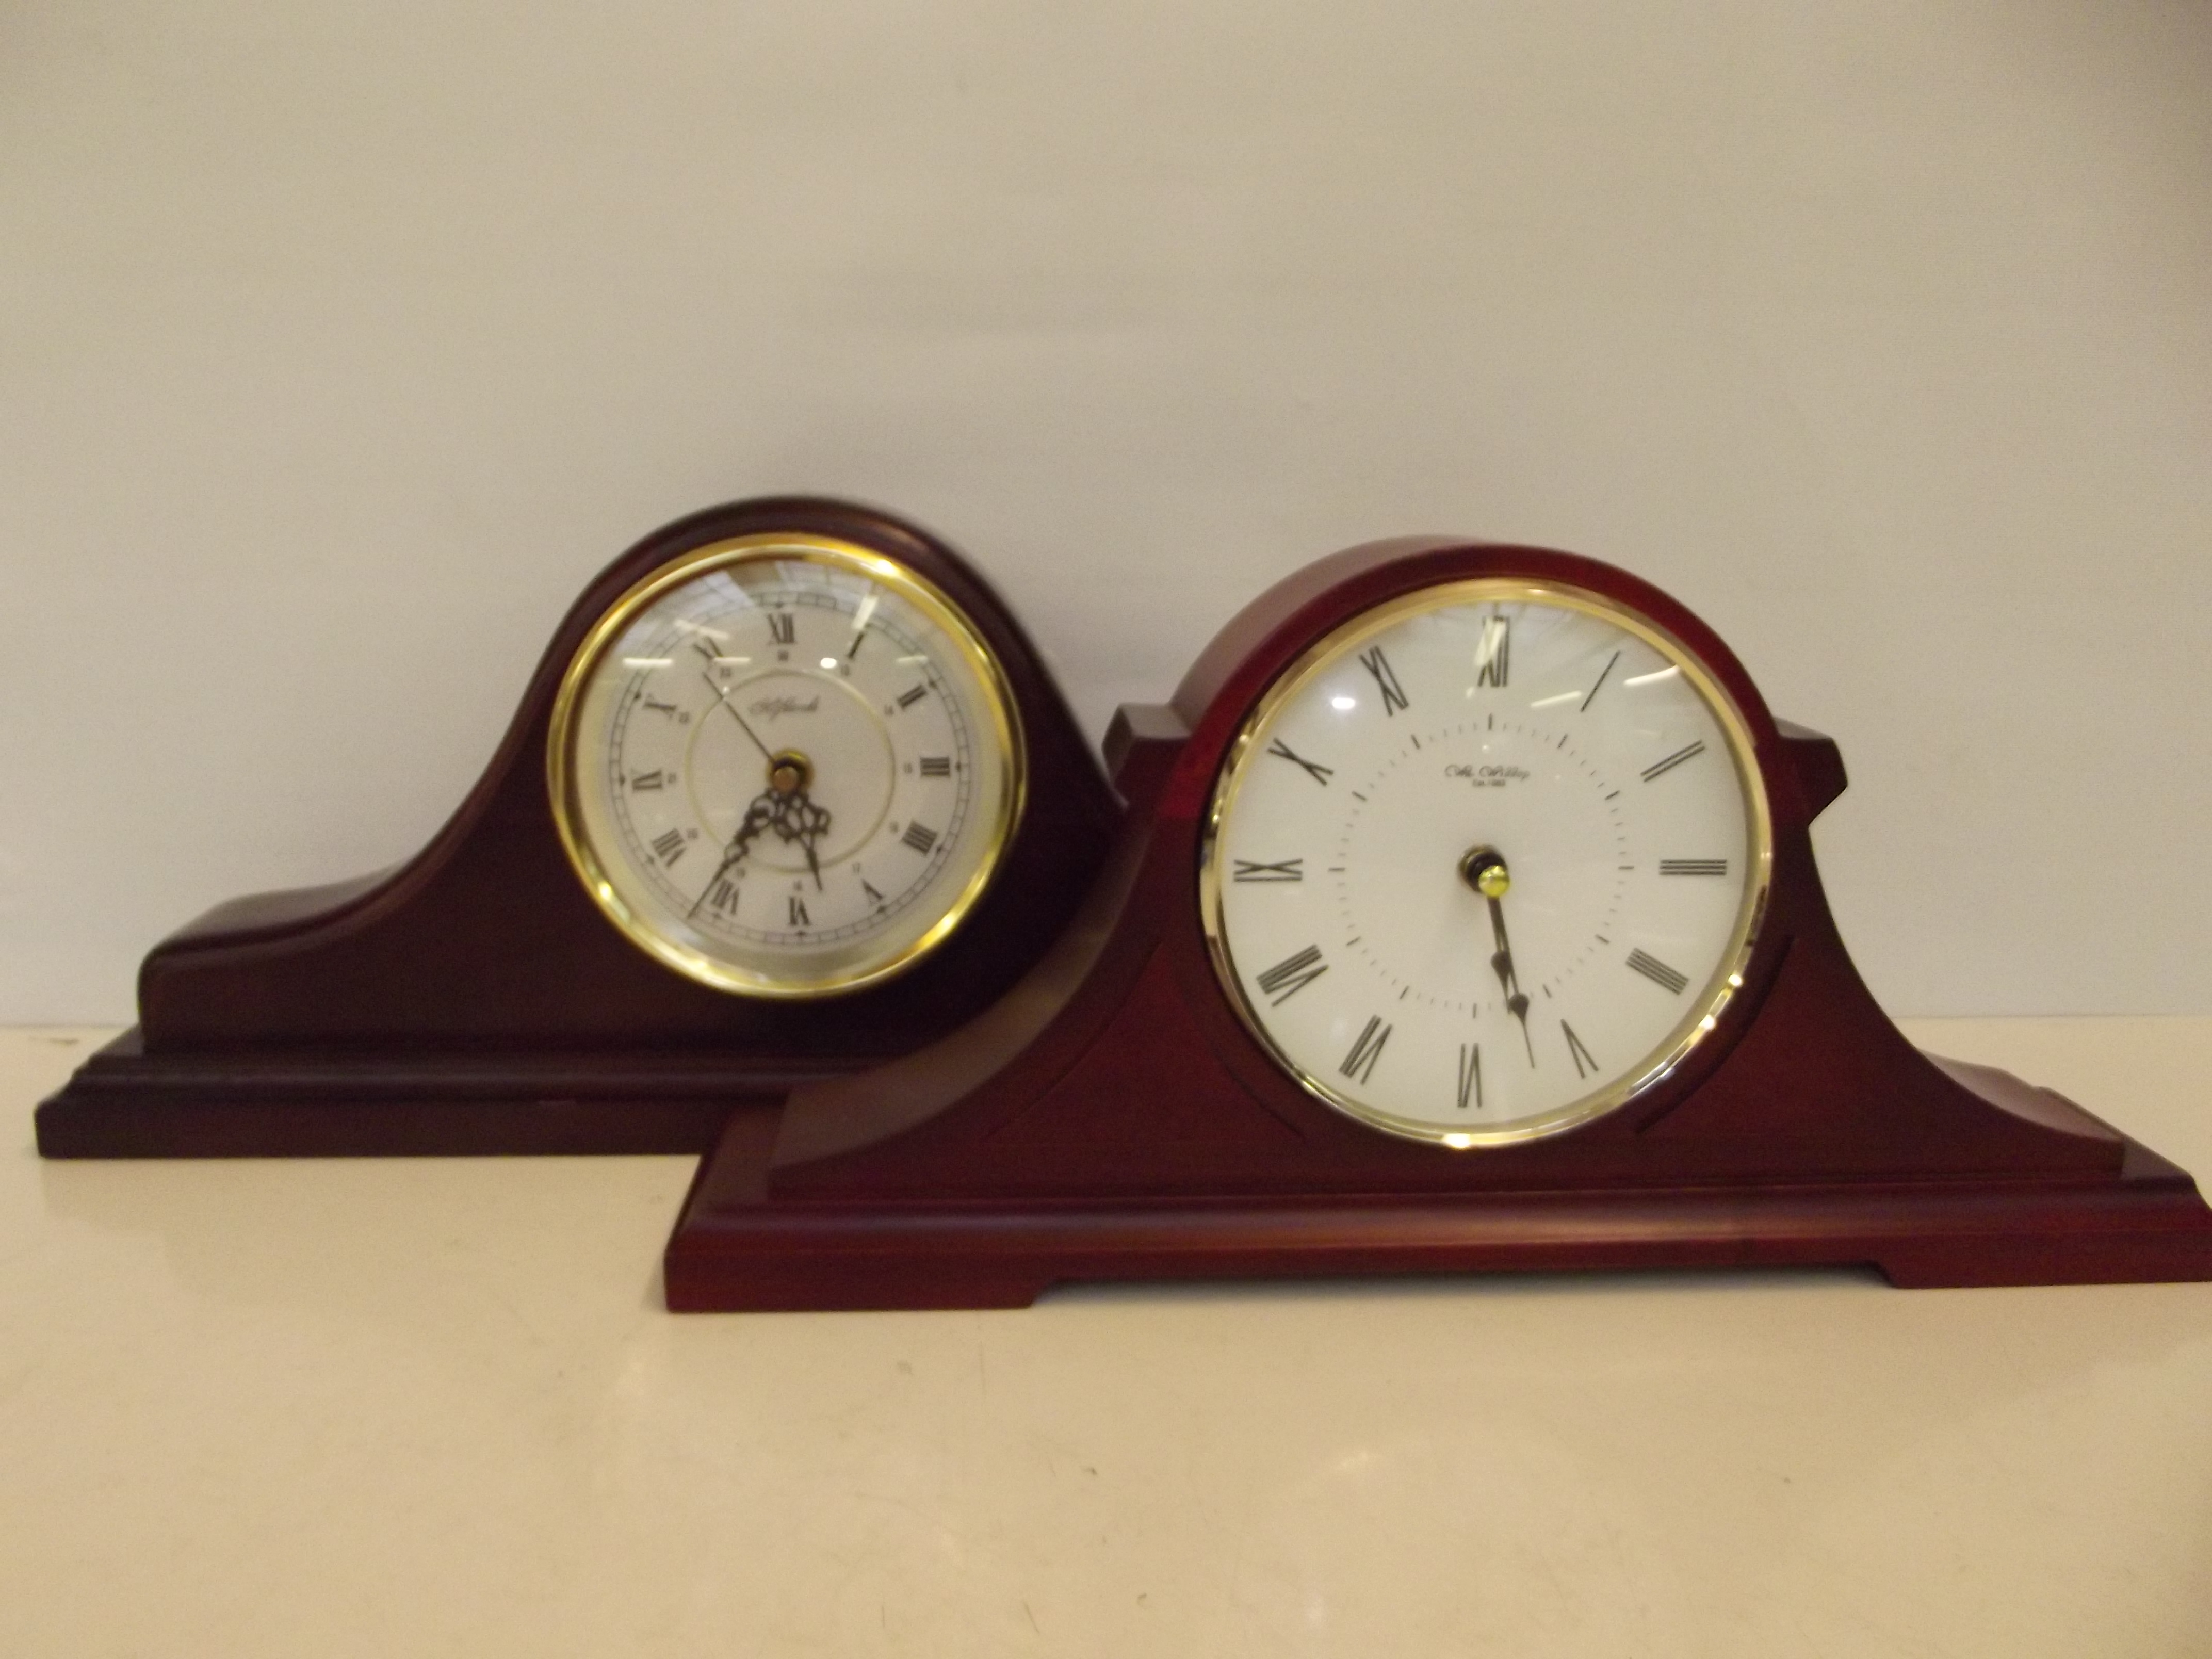 Highland napoleon hat clock together with a Willia